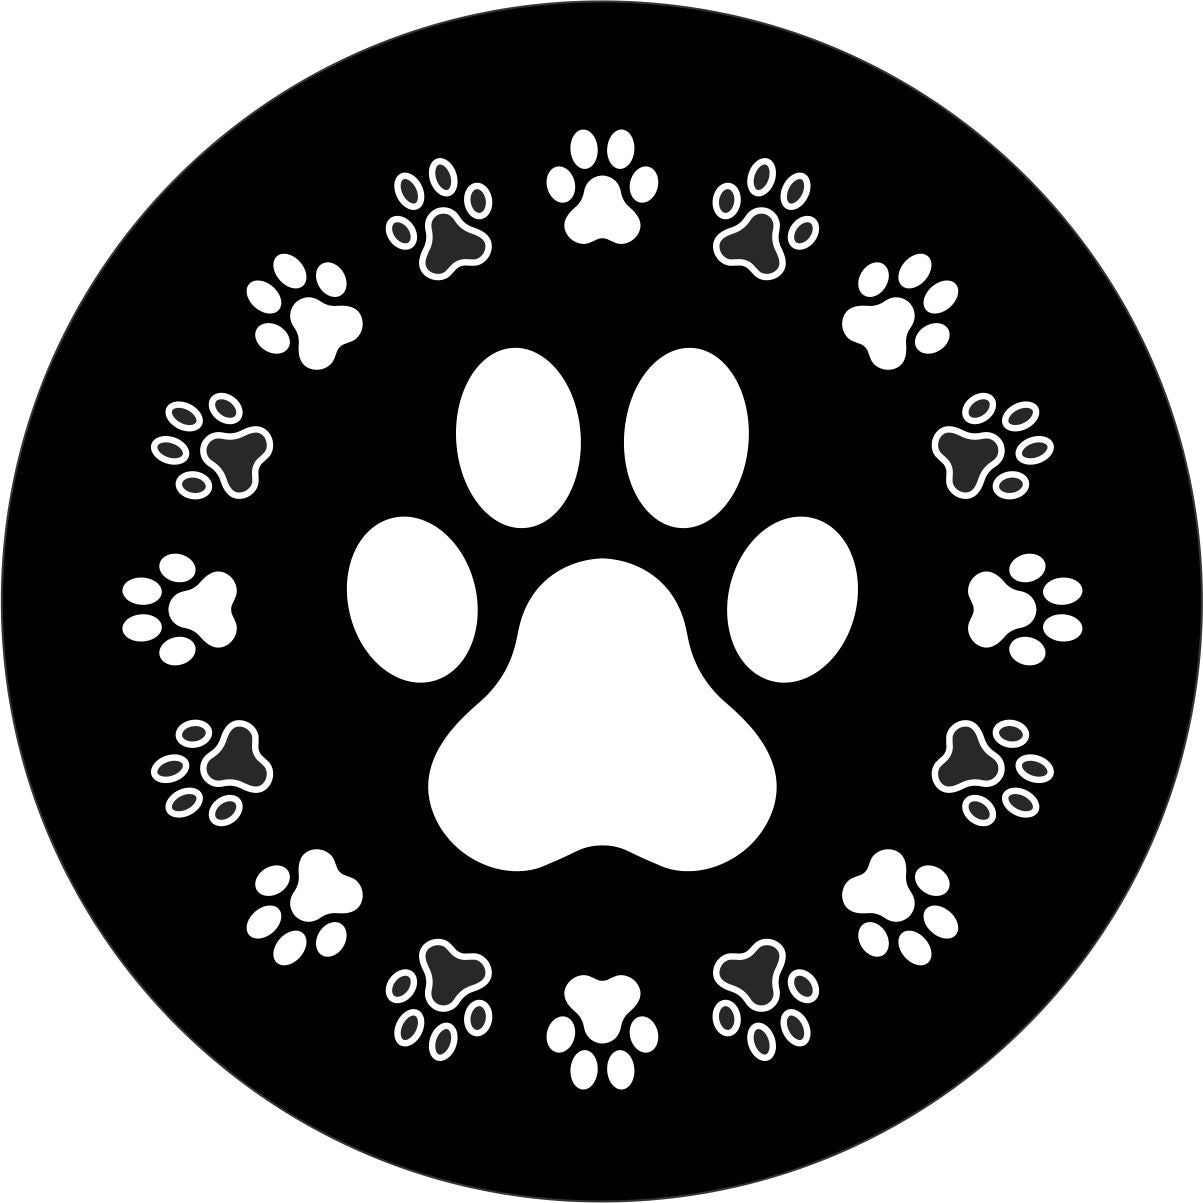 Spare tire cover design of a wreath of dog paws or a circle of small dog paws around one large dog paw.